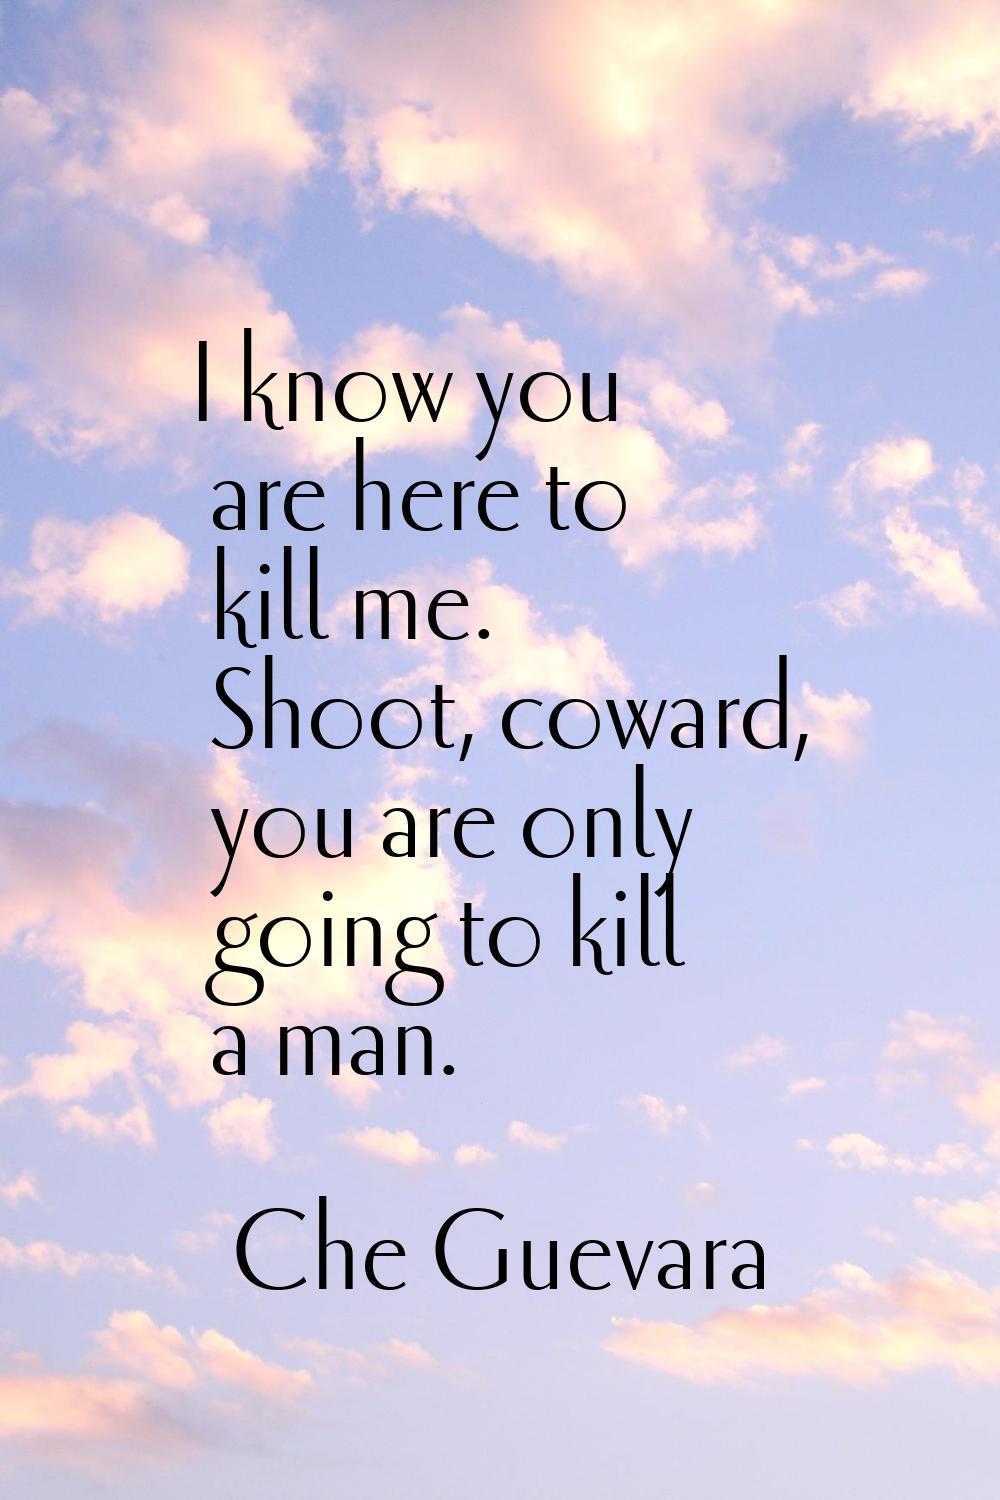 I know you are here to kill me. Shoot, coward, you are only going to kill a man.